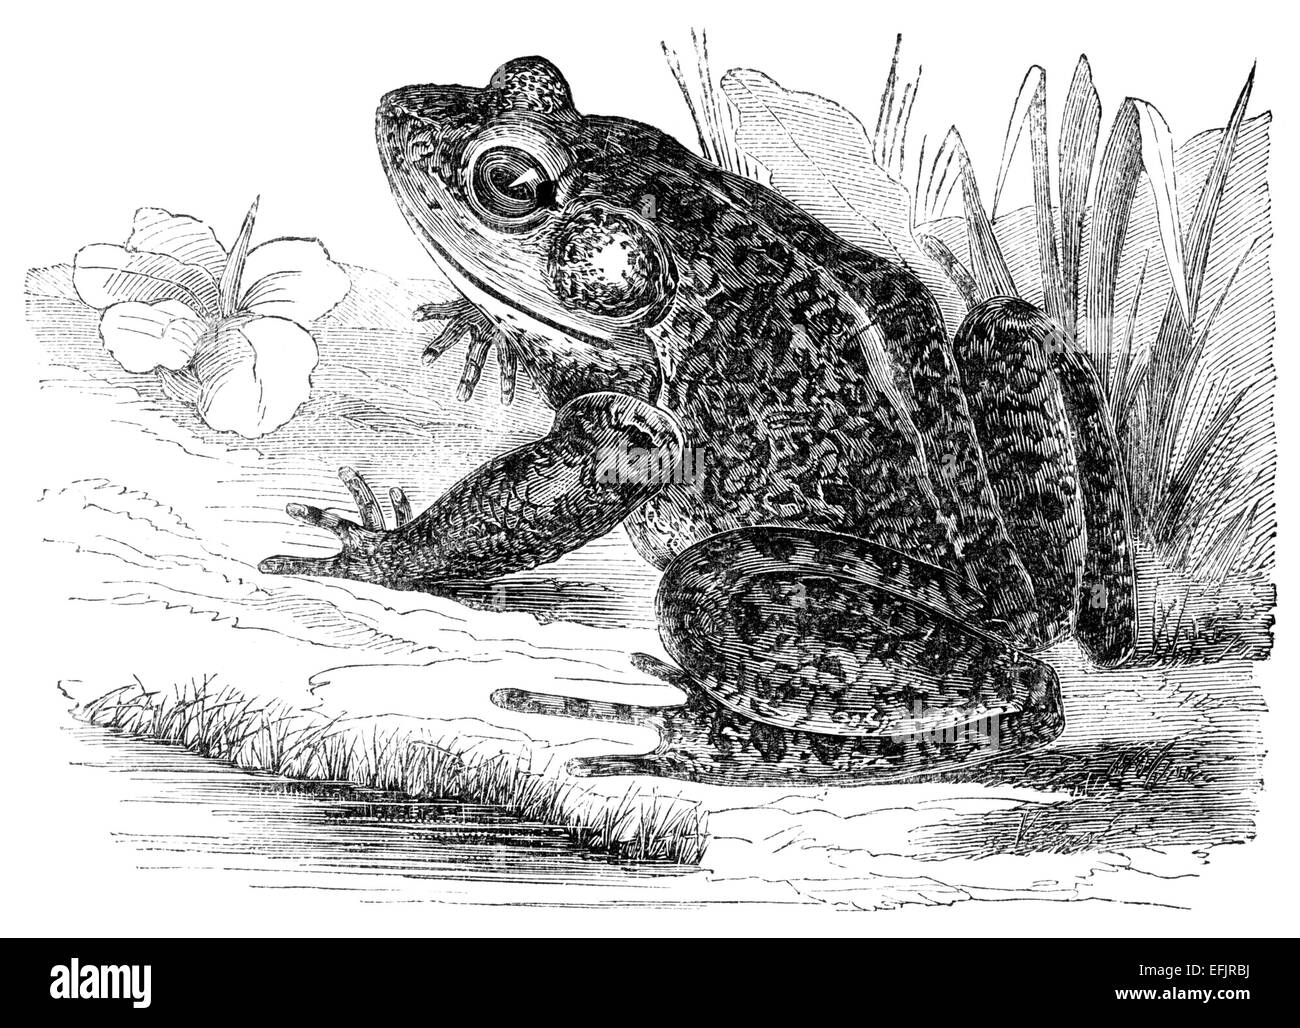 Victorian engraving of a frog. Digitally restored image from a mid-19th century Encyclopaedia. Stock Photo